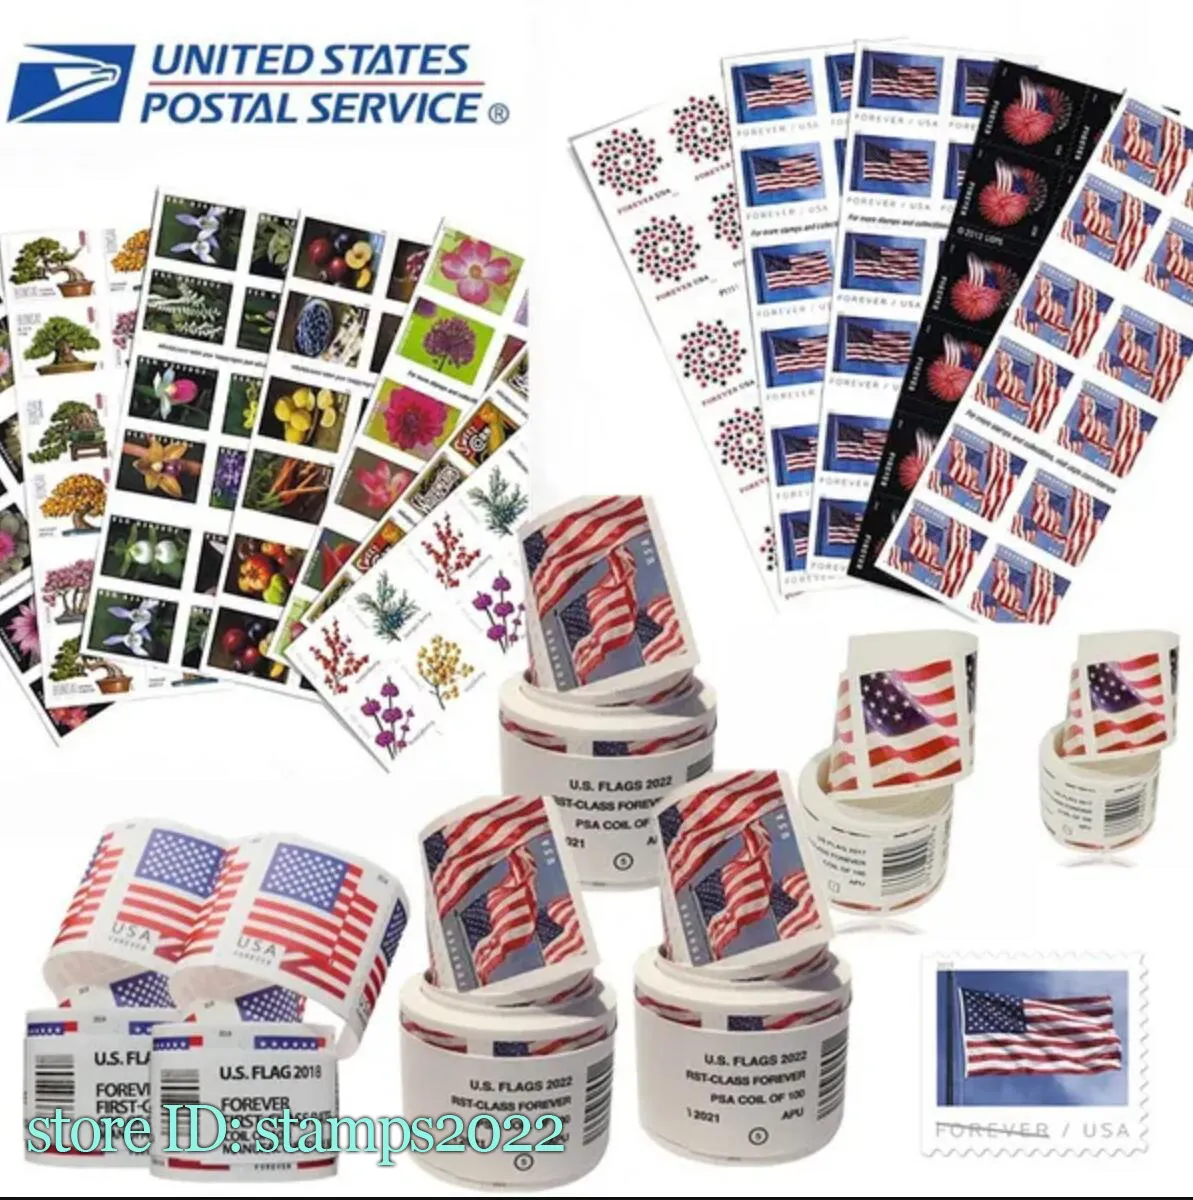 2022 USA Forever US Flag Discounted Postal Mailing First Class Service Roll of 100 For Envelopes Postcard Mail Supplies Wedding Anniversary Thank You Letters